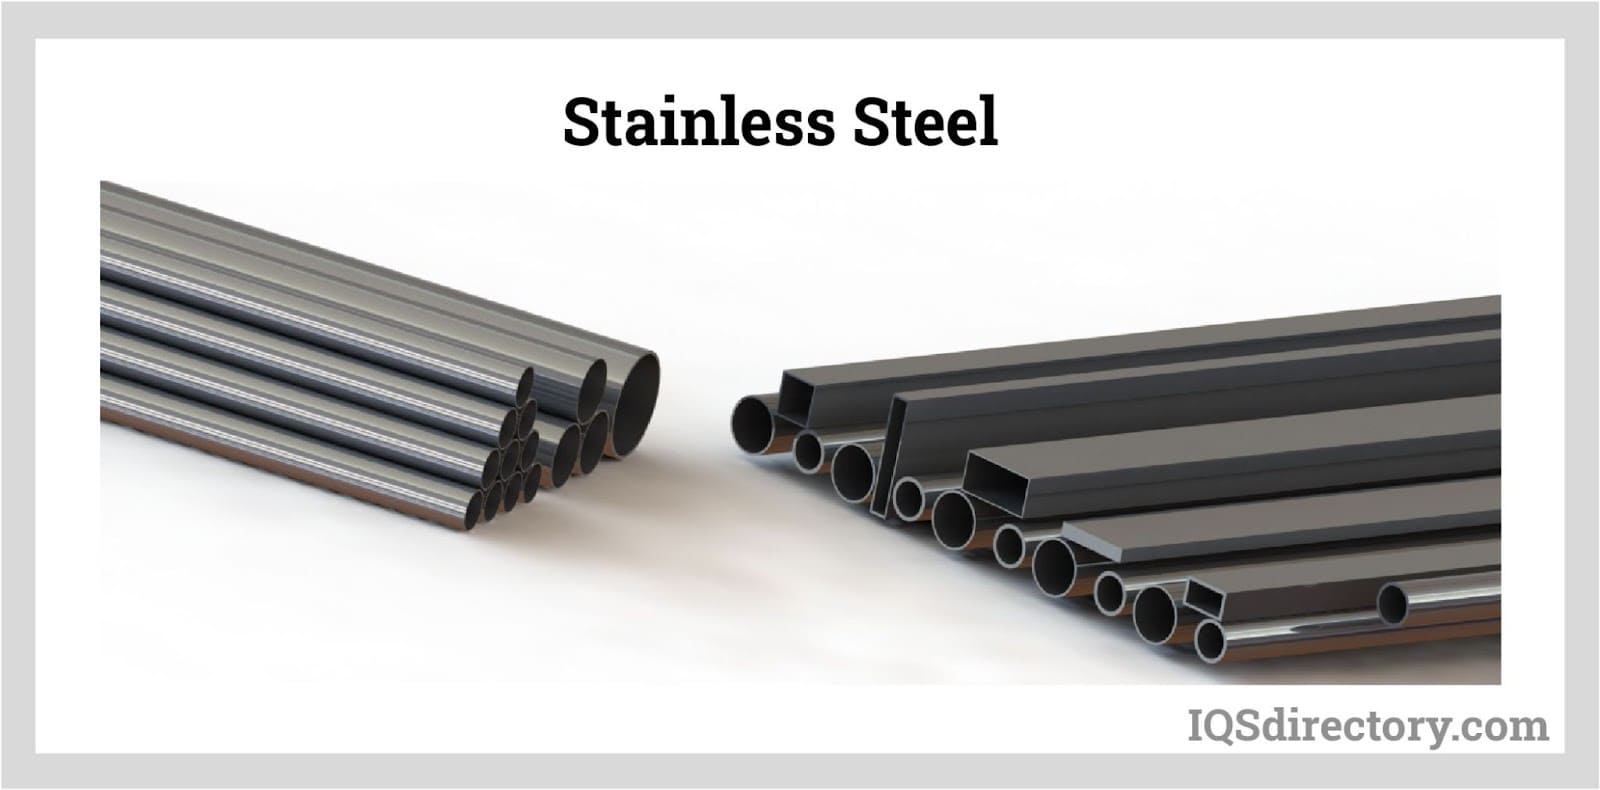 What Makes Stainless Steel Different From Other Metals?